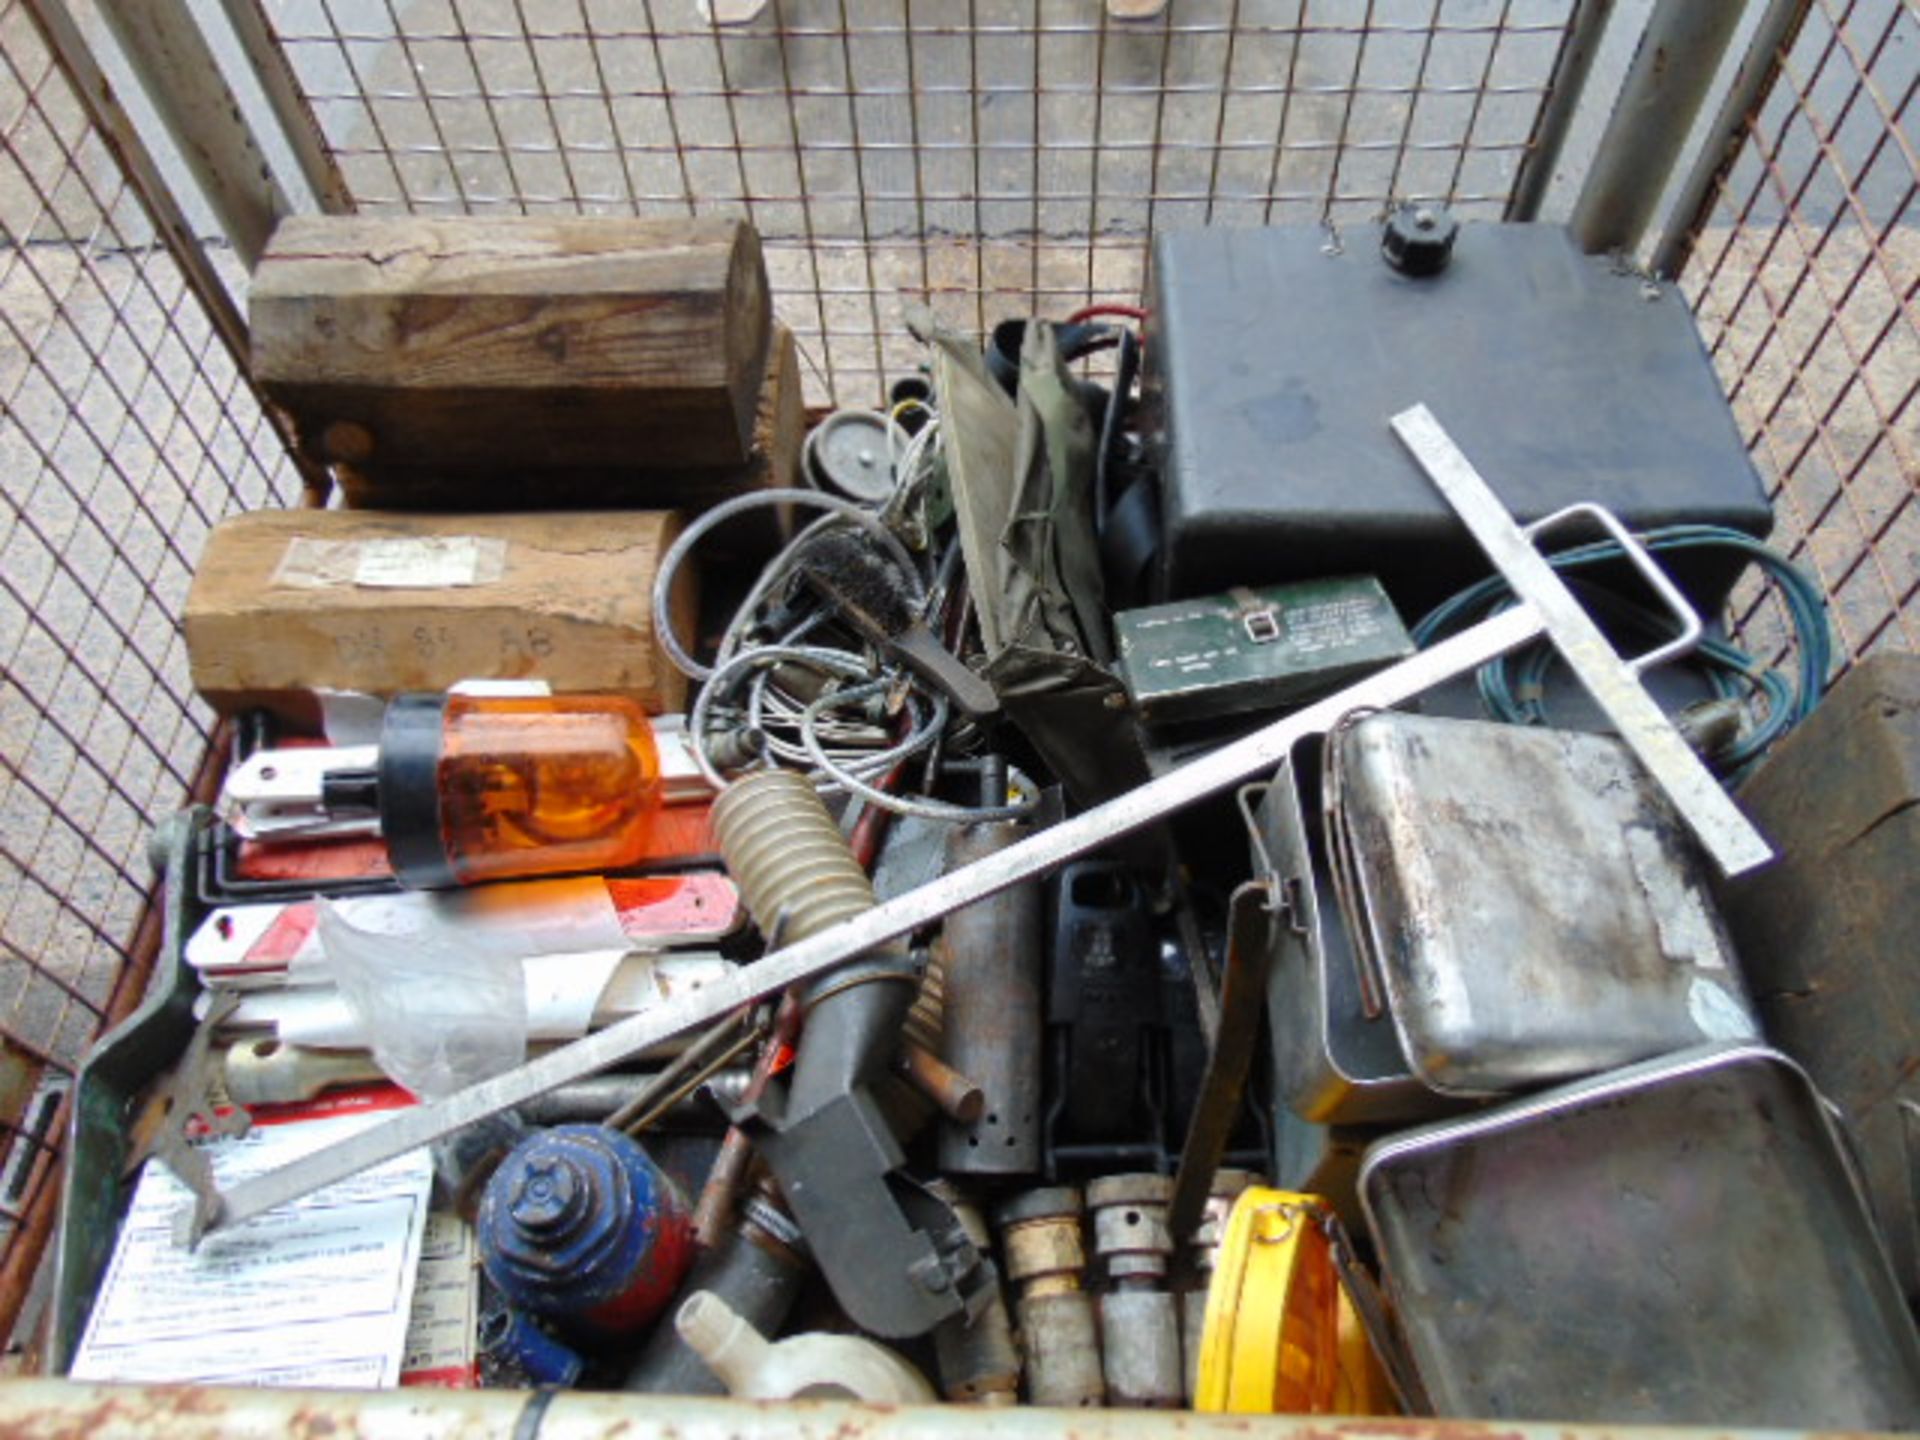 1 x Stillage of Fighting Vehicle Spares inc Cables, Pins, Water Container, Chocks, Beacon etc